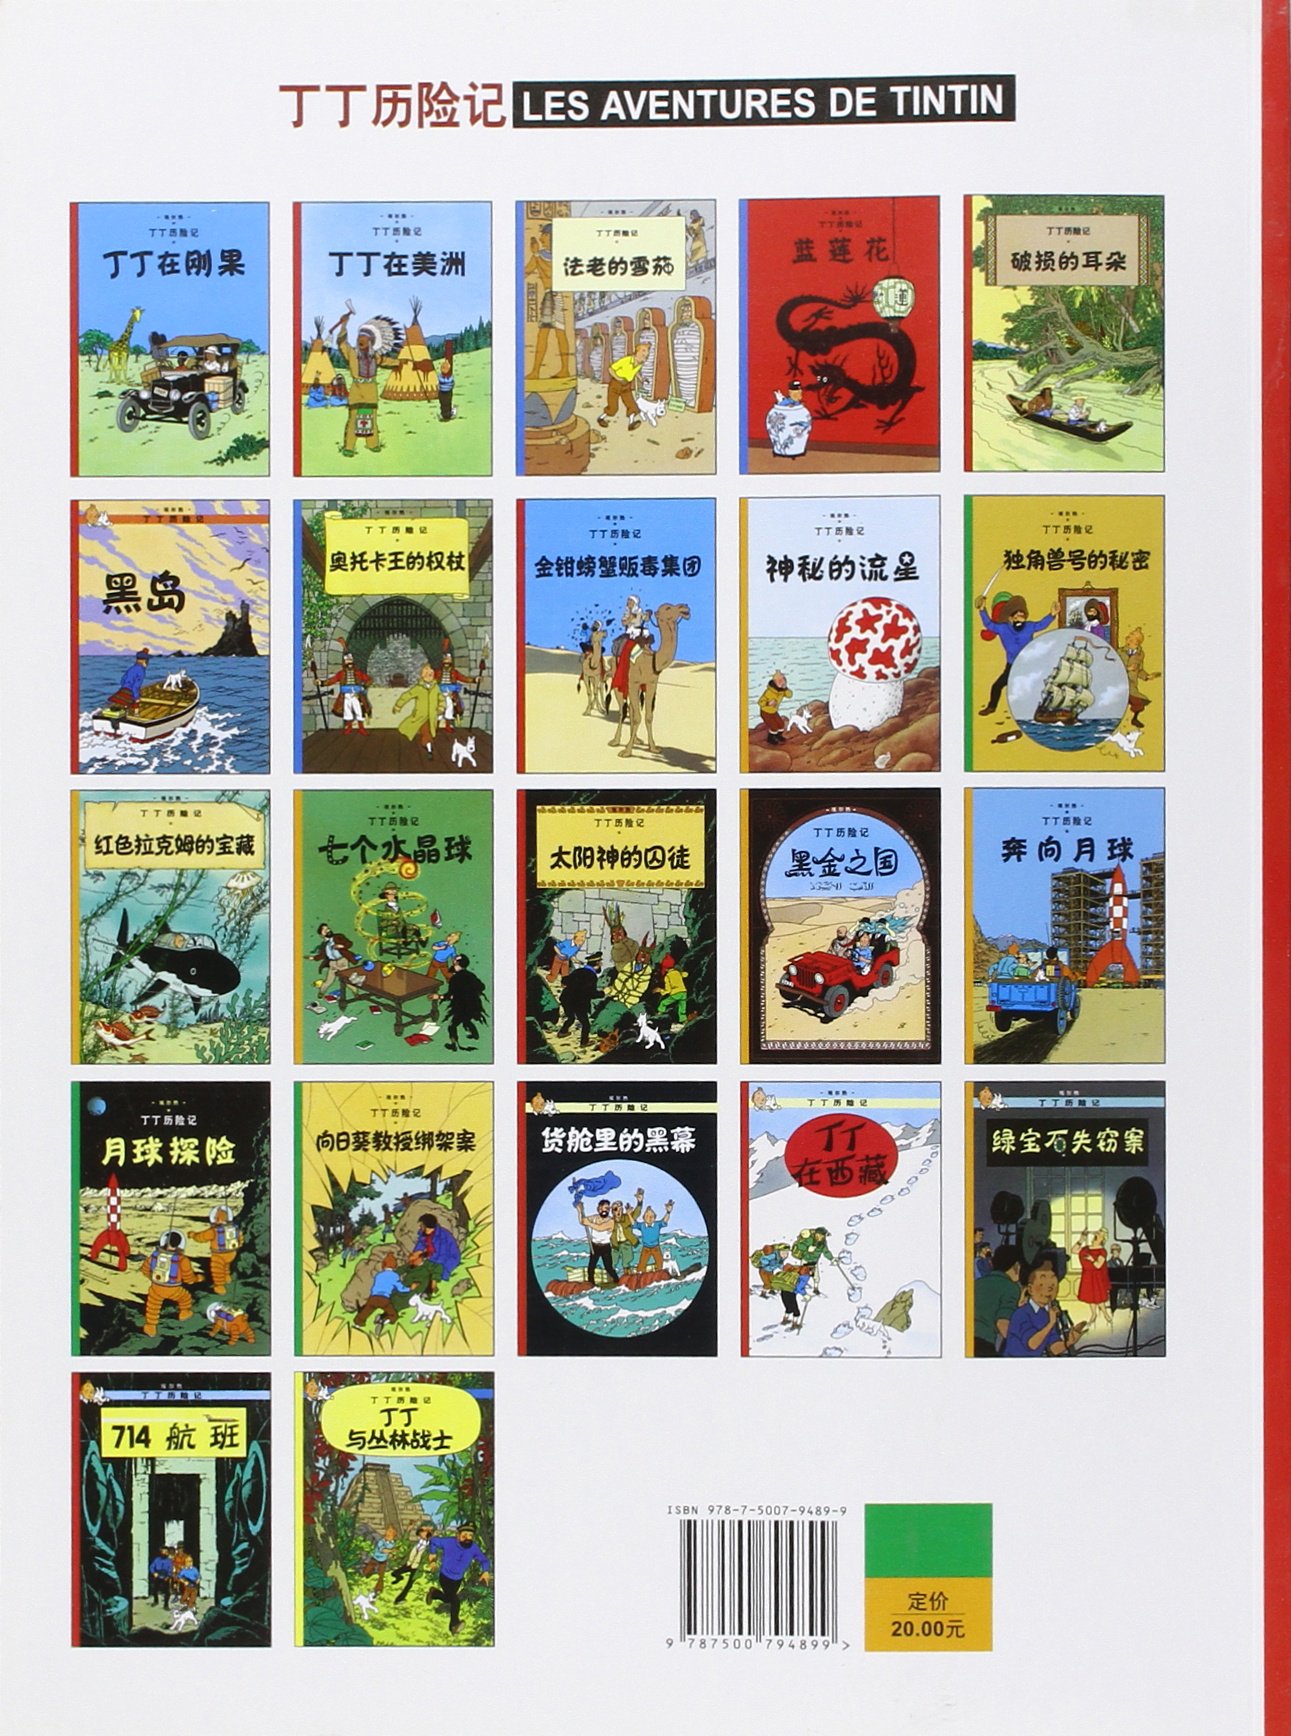 Tintin in Tibet - Chinese langauge edition (Chinois) (Chinese Edition)